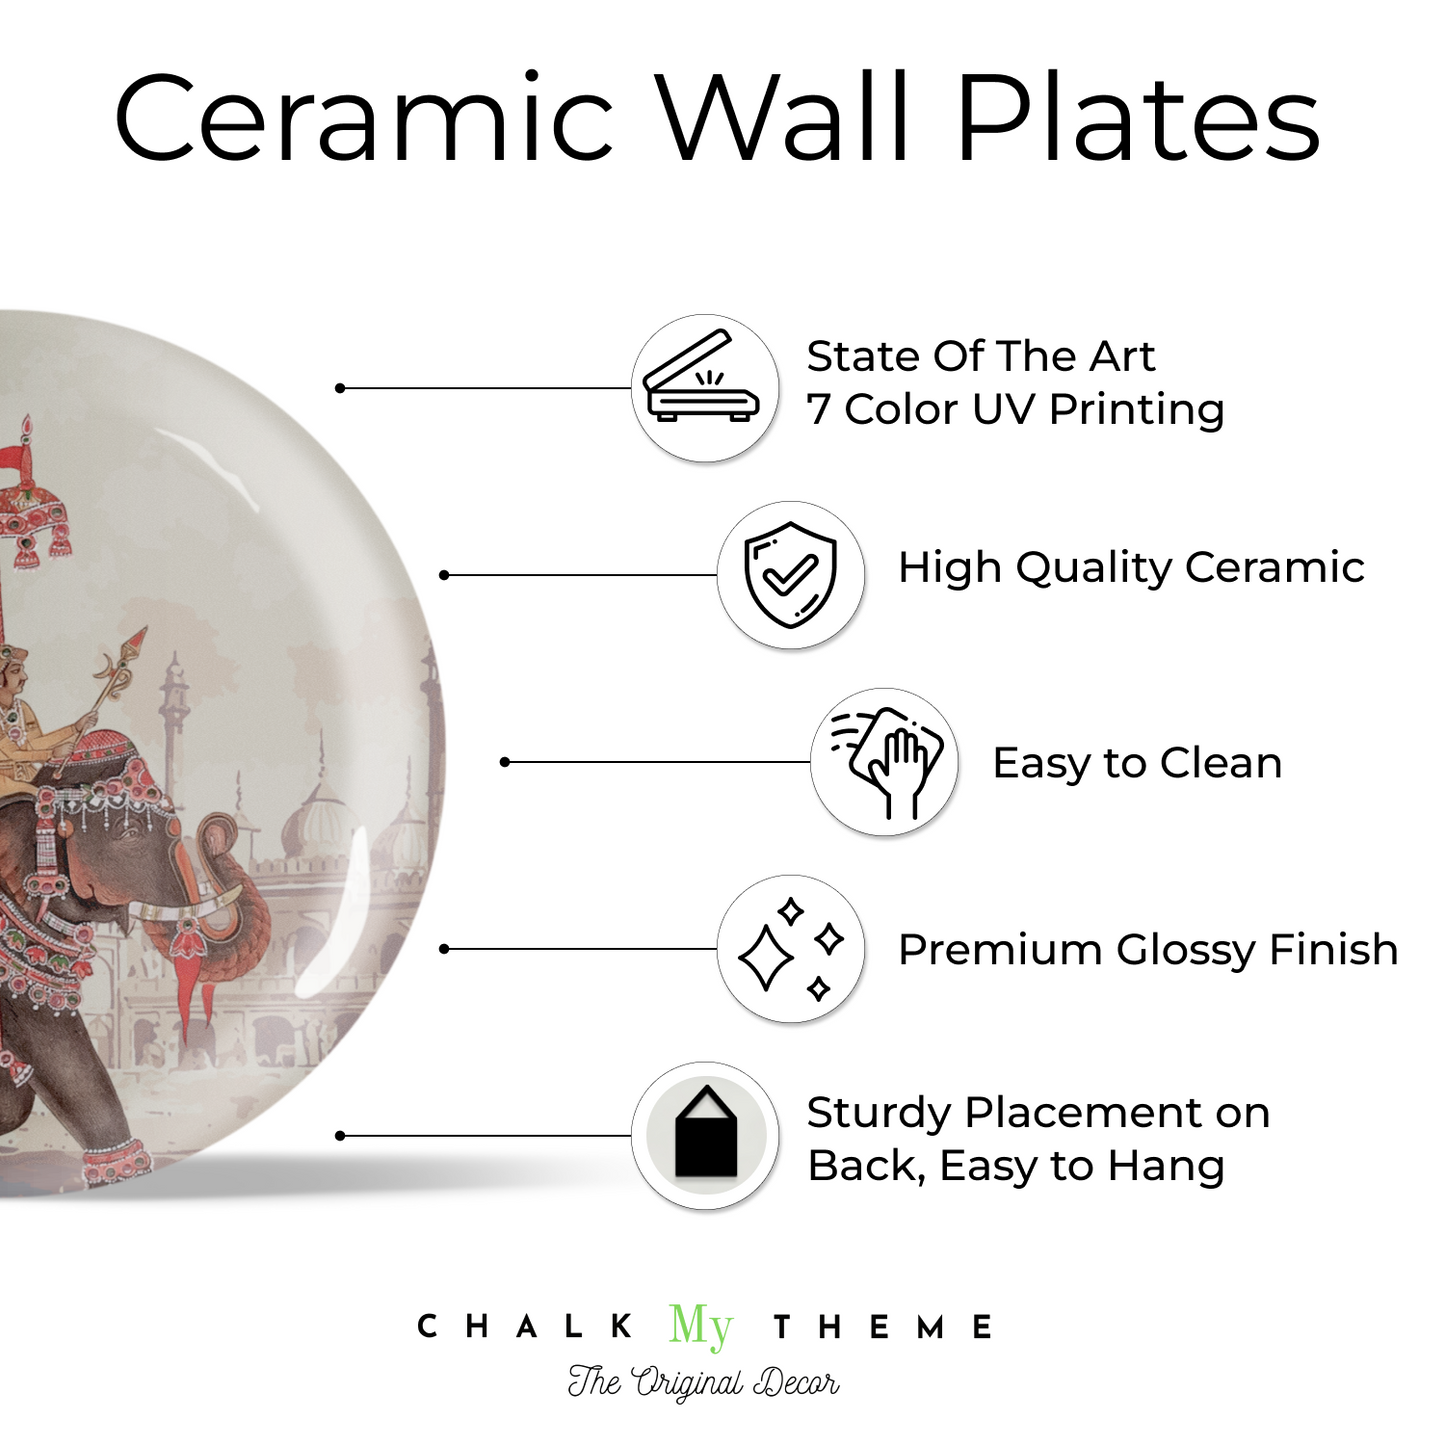 King on Royal Elephant Ceramic Wall Plate for business